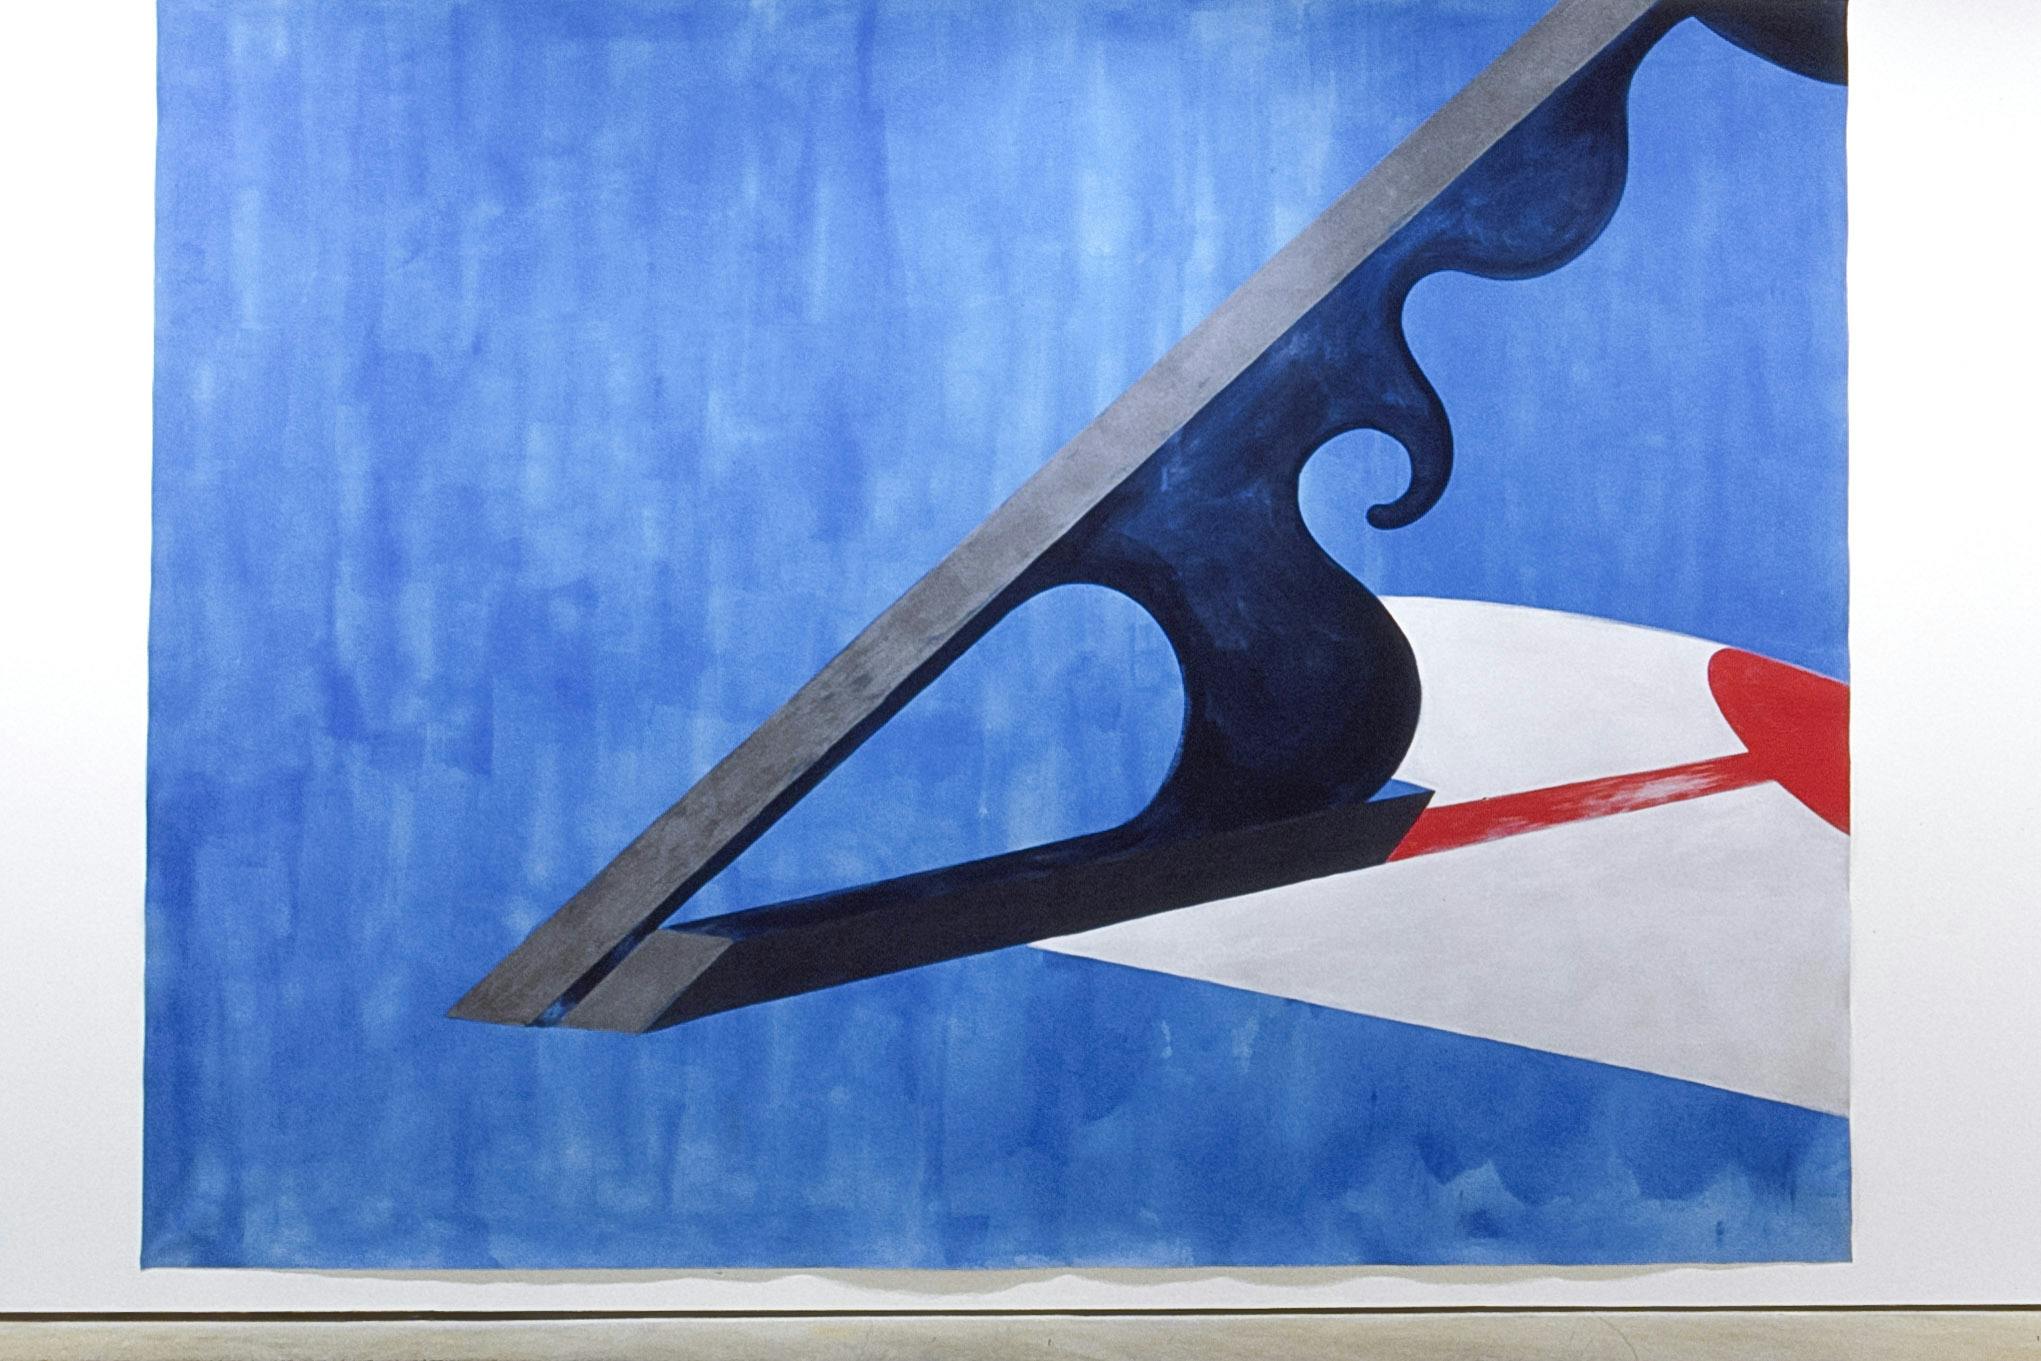 A large painting is installed in the gallery. In the sky-blue background, two gray straight lines form a sharp angle. A navy-coloured shape resembling melting metal is drawn in between the two lines. 